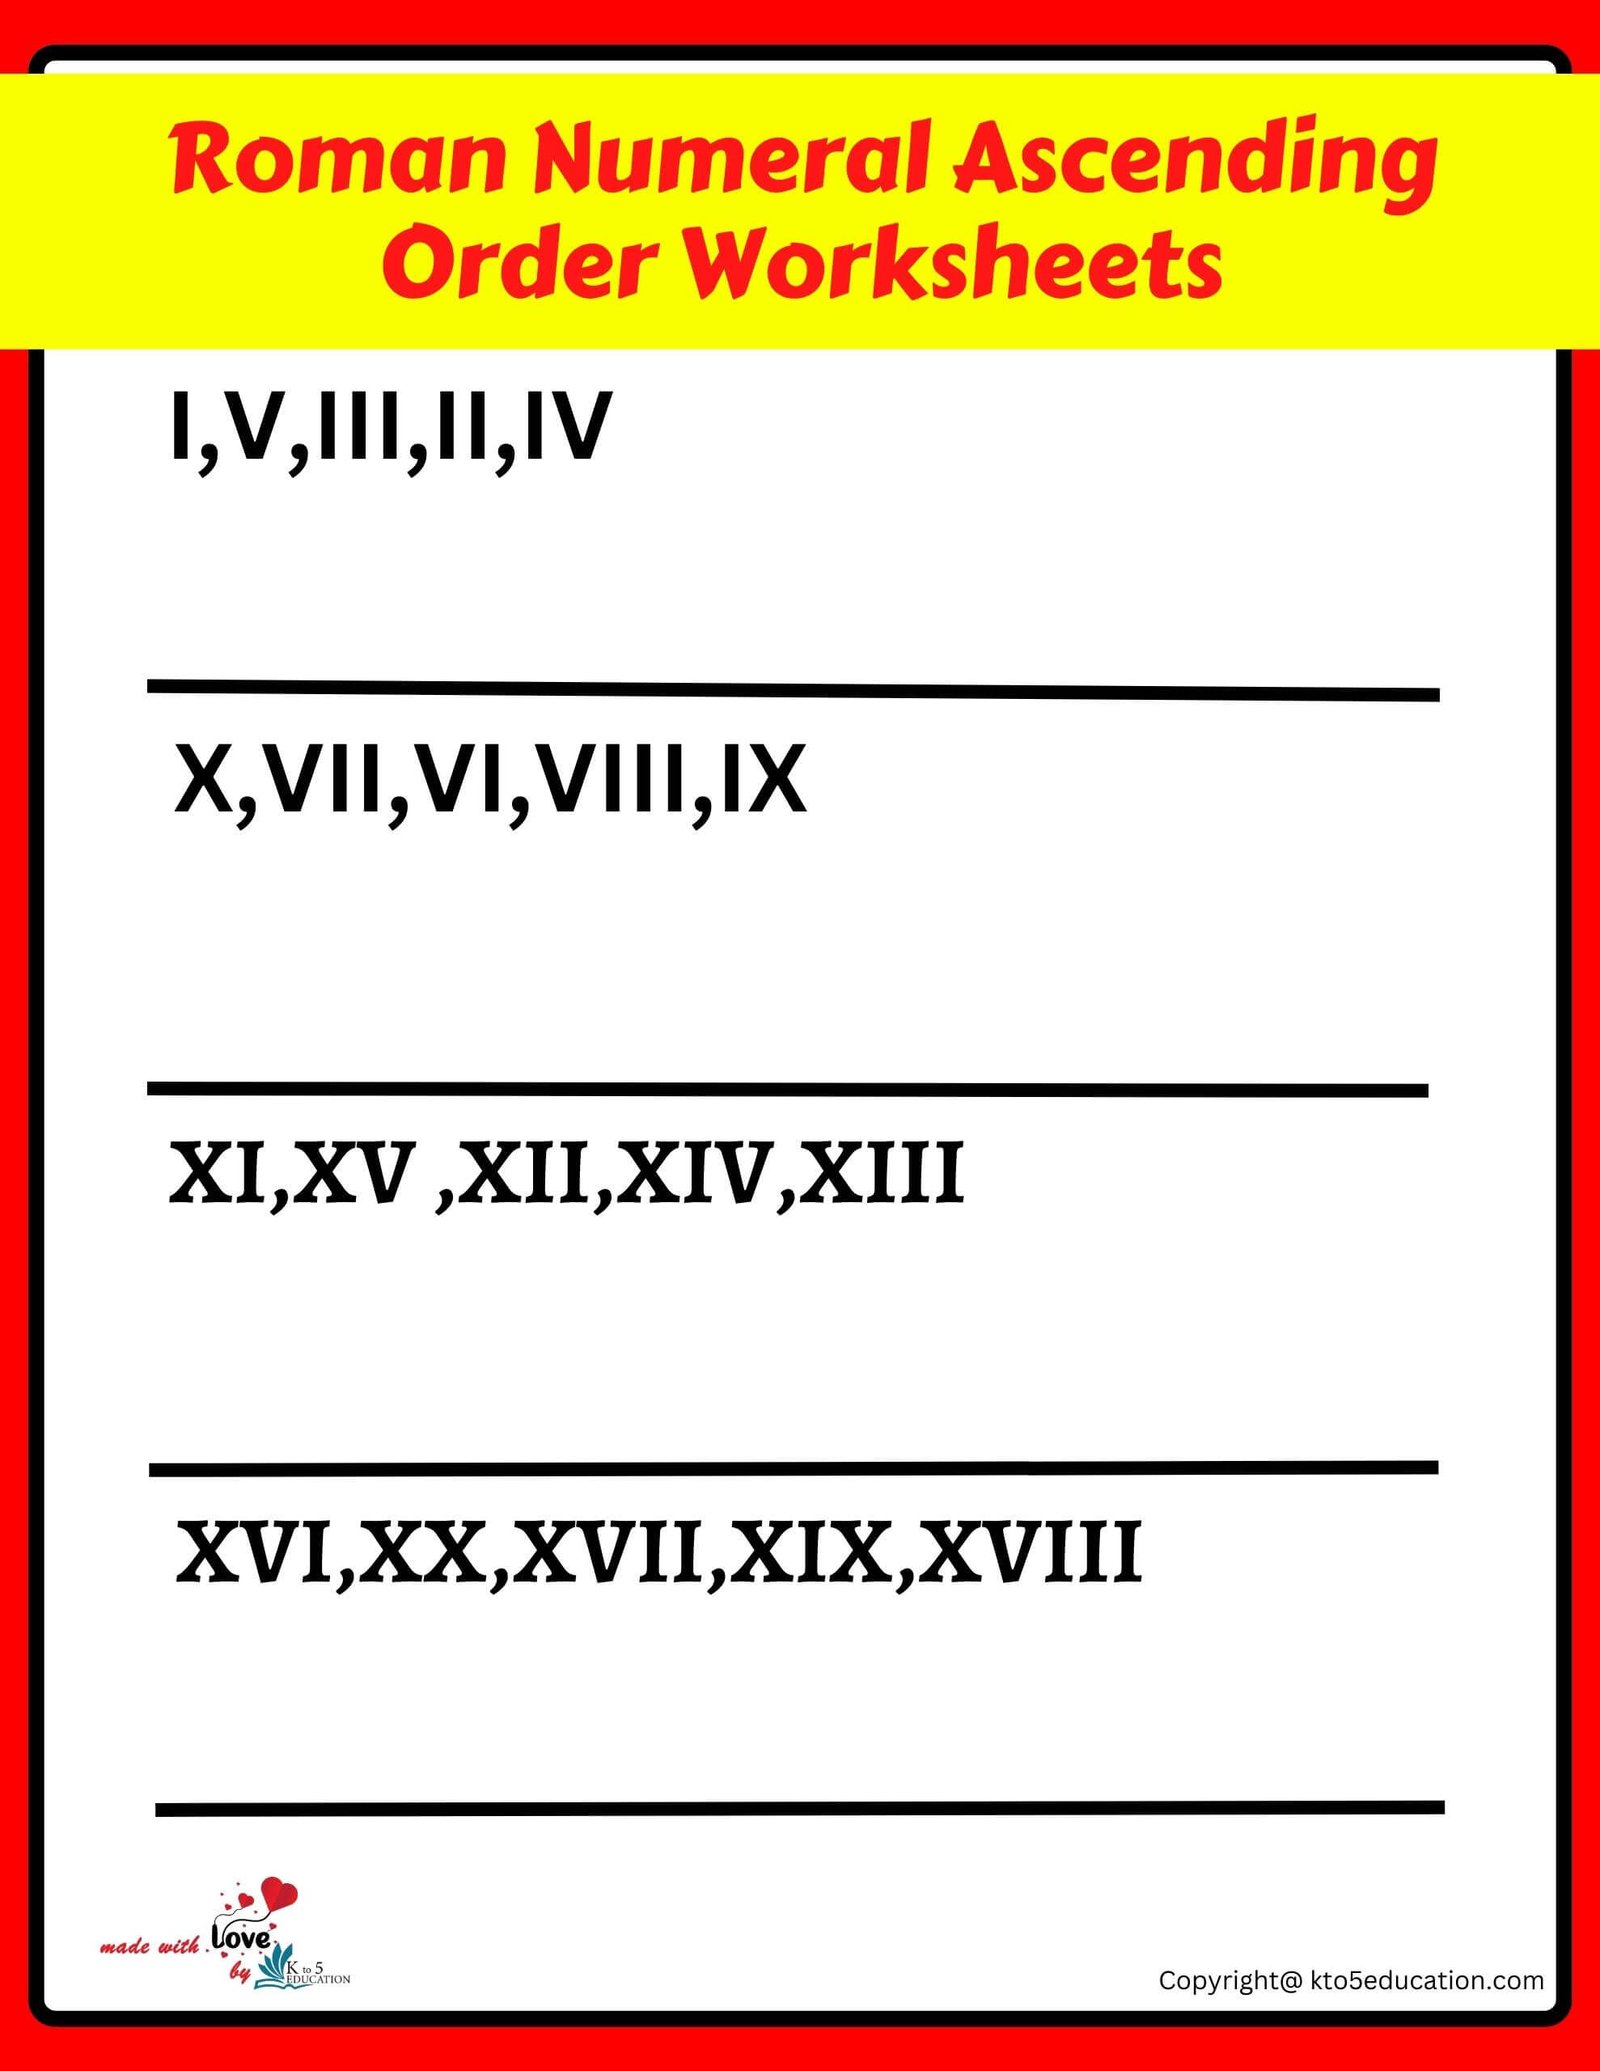 Roman Numeral Ascending Ordering Worksheets 1 to 20